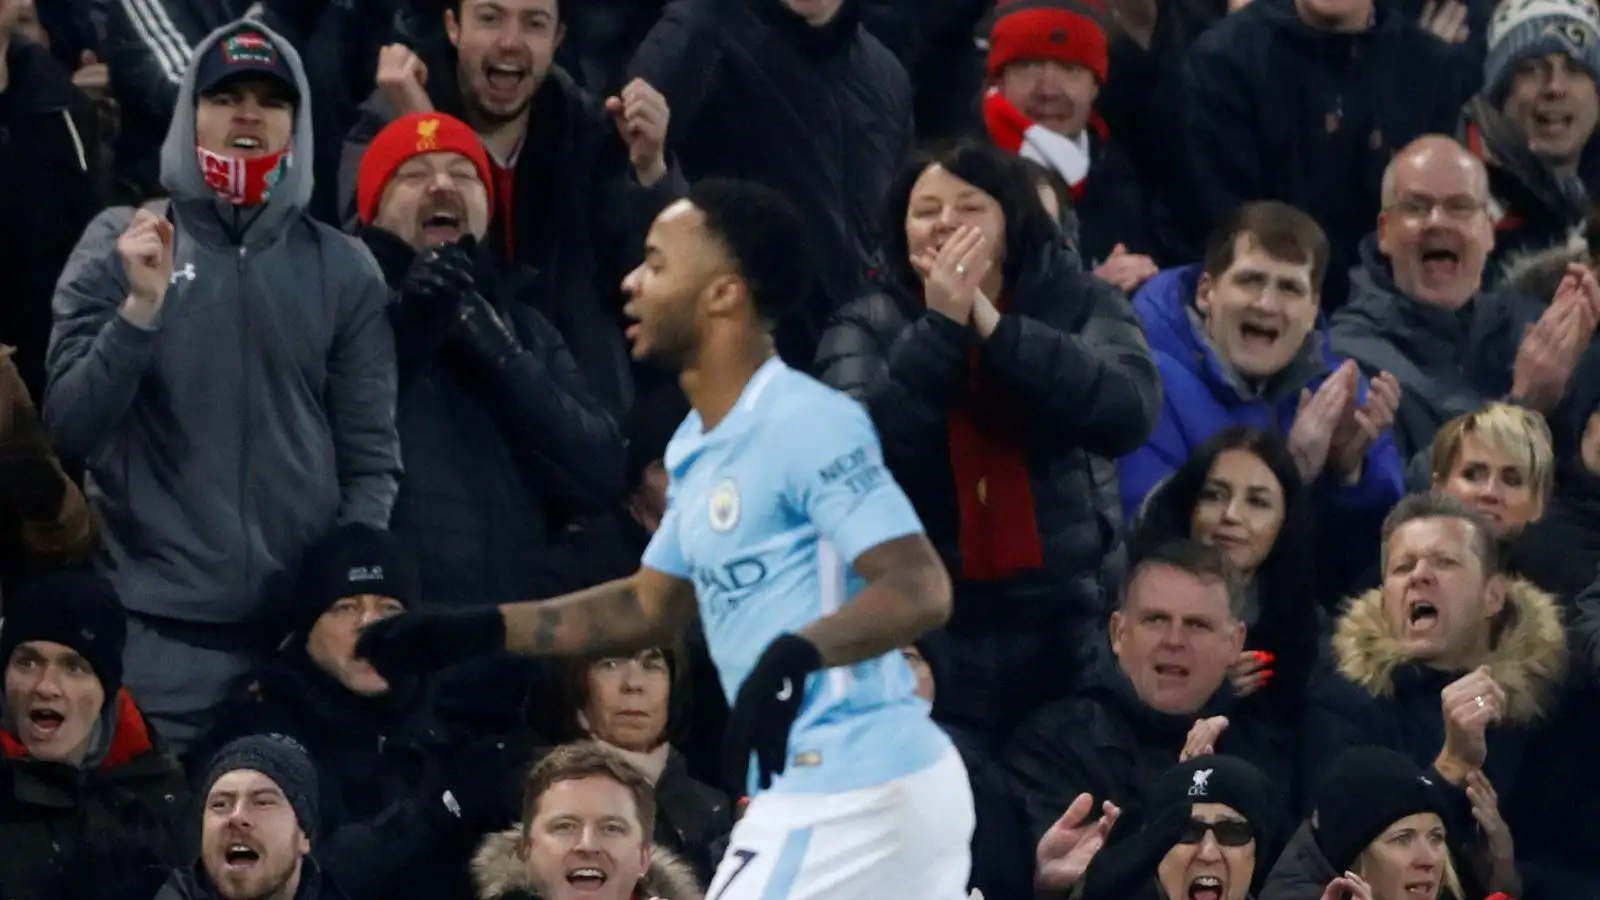 Former Liverpool winger Raheem Sterling gets shouted at by supporters